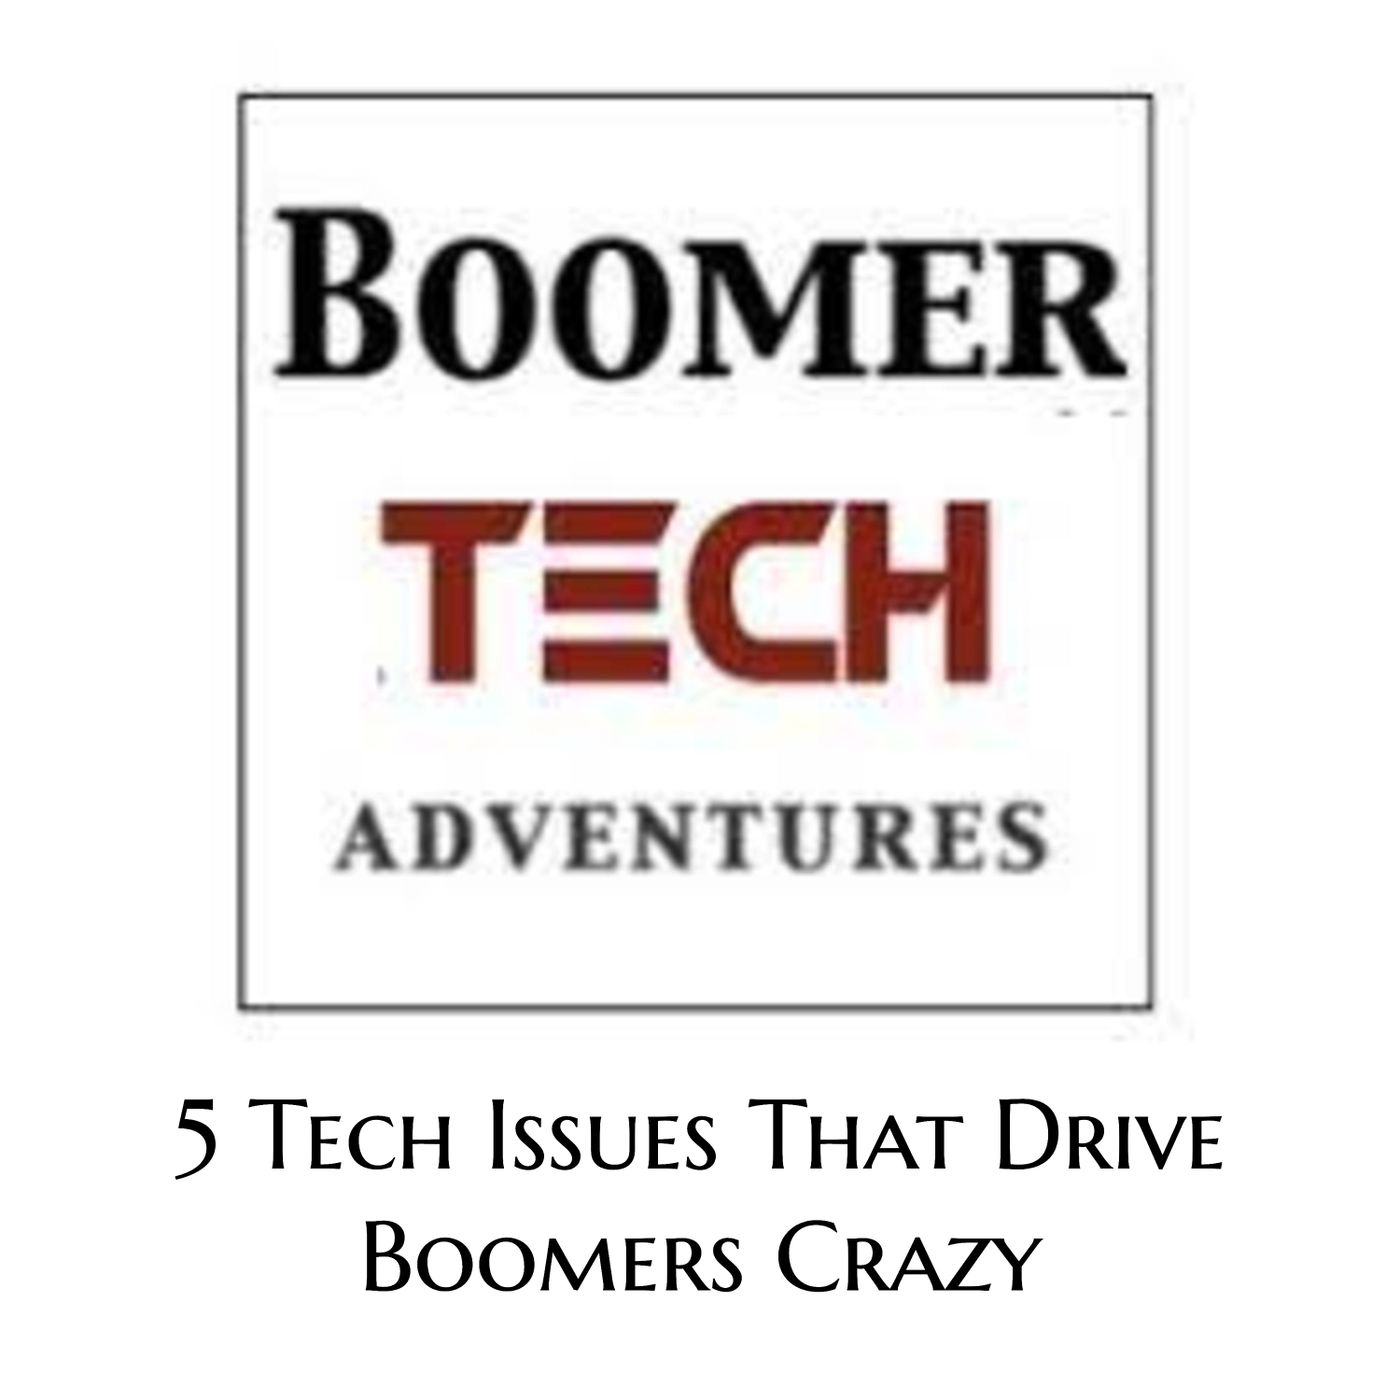 5 Tech Issues That Drive Boomers Crazy